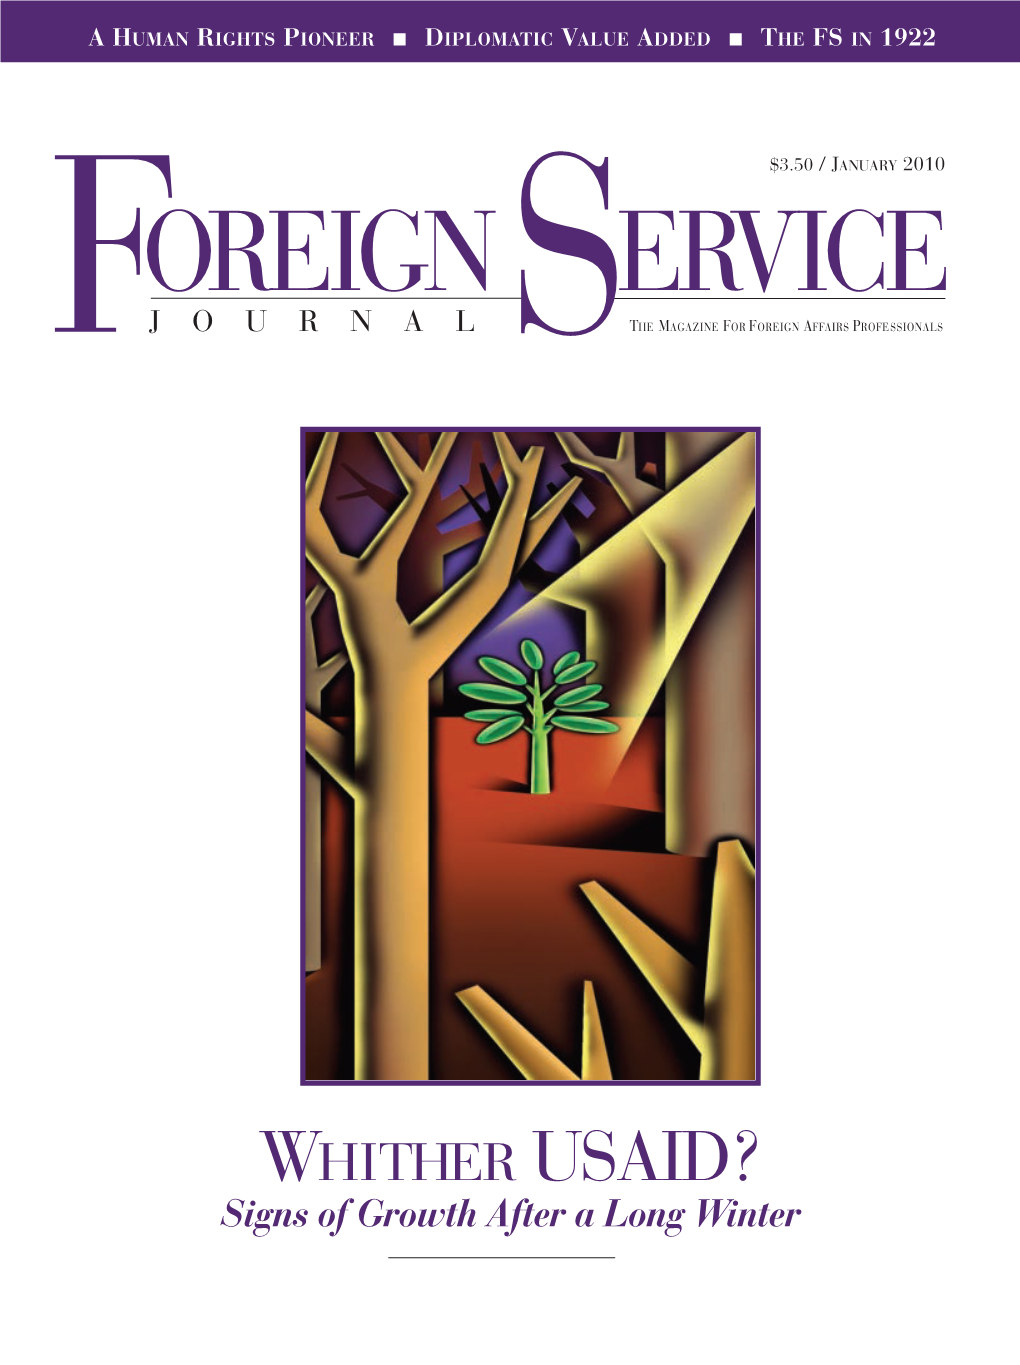 The Foreign Service Journal, January 2010